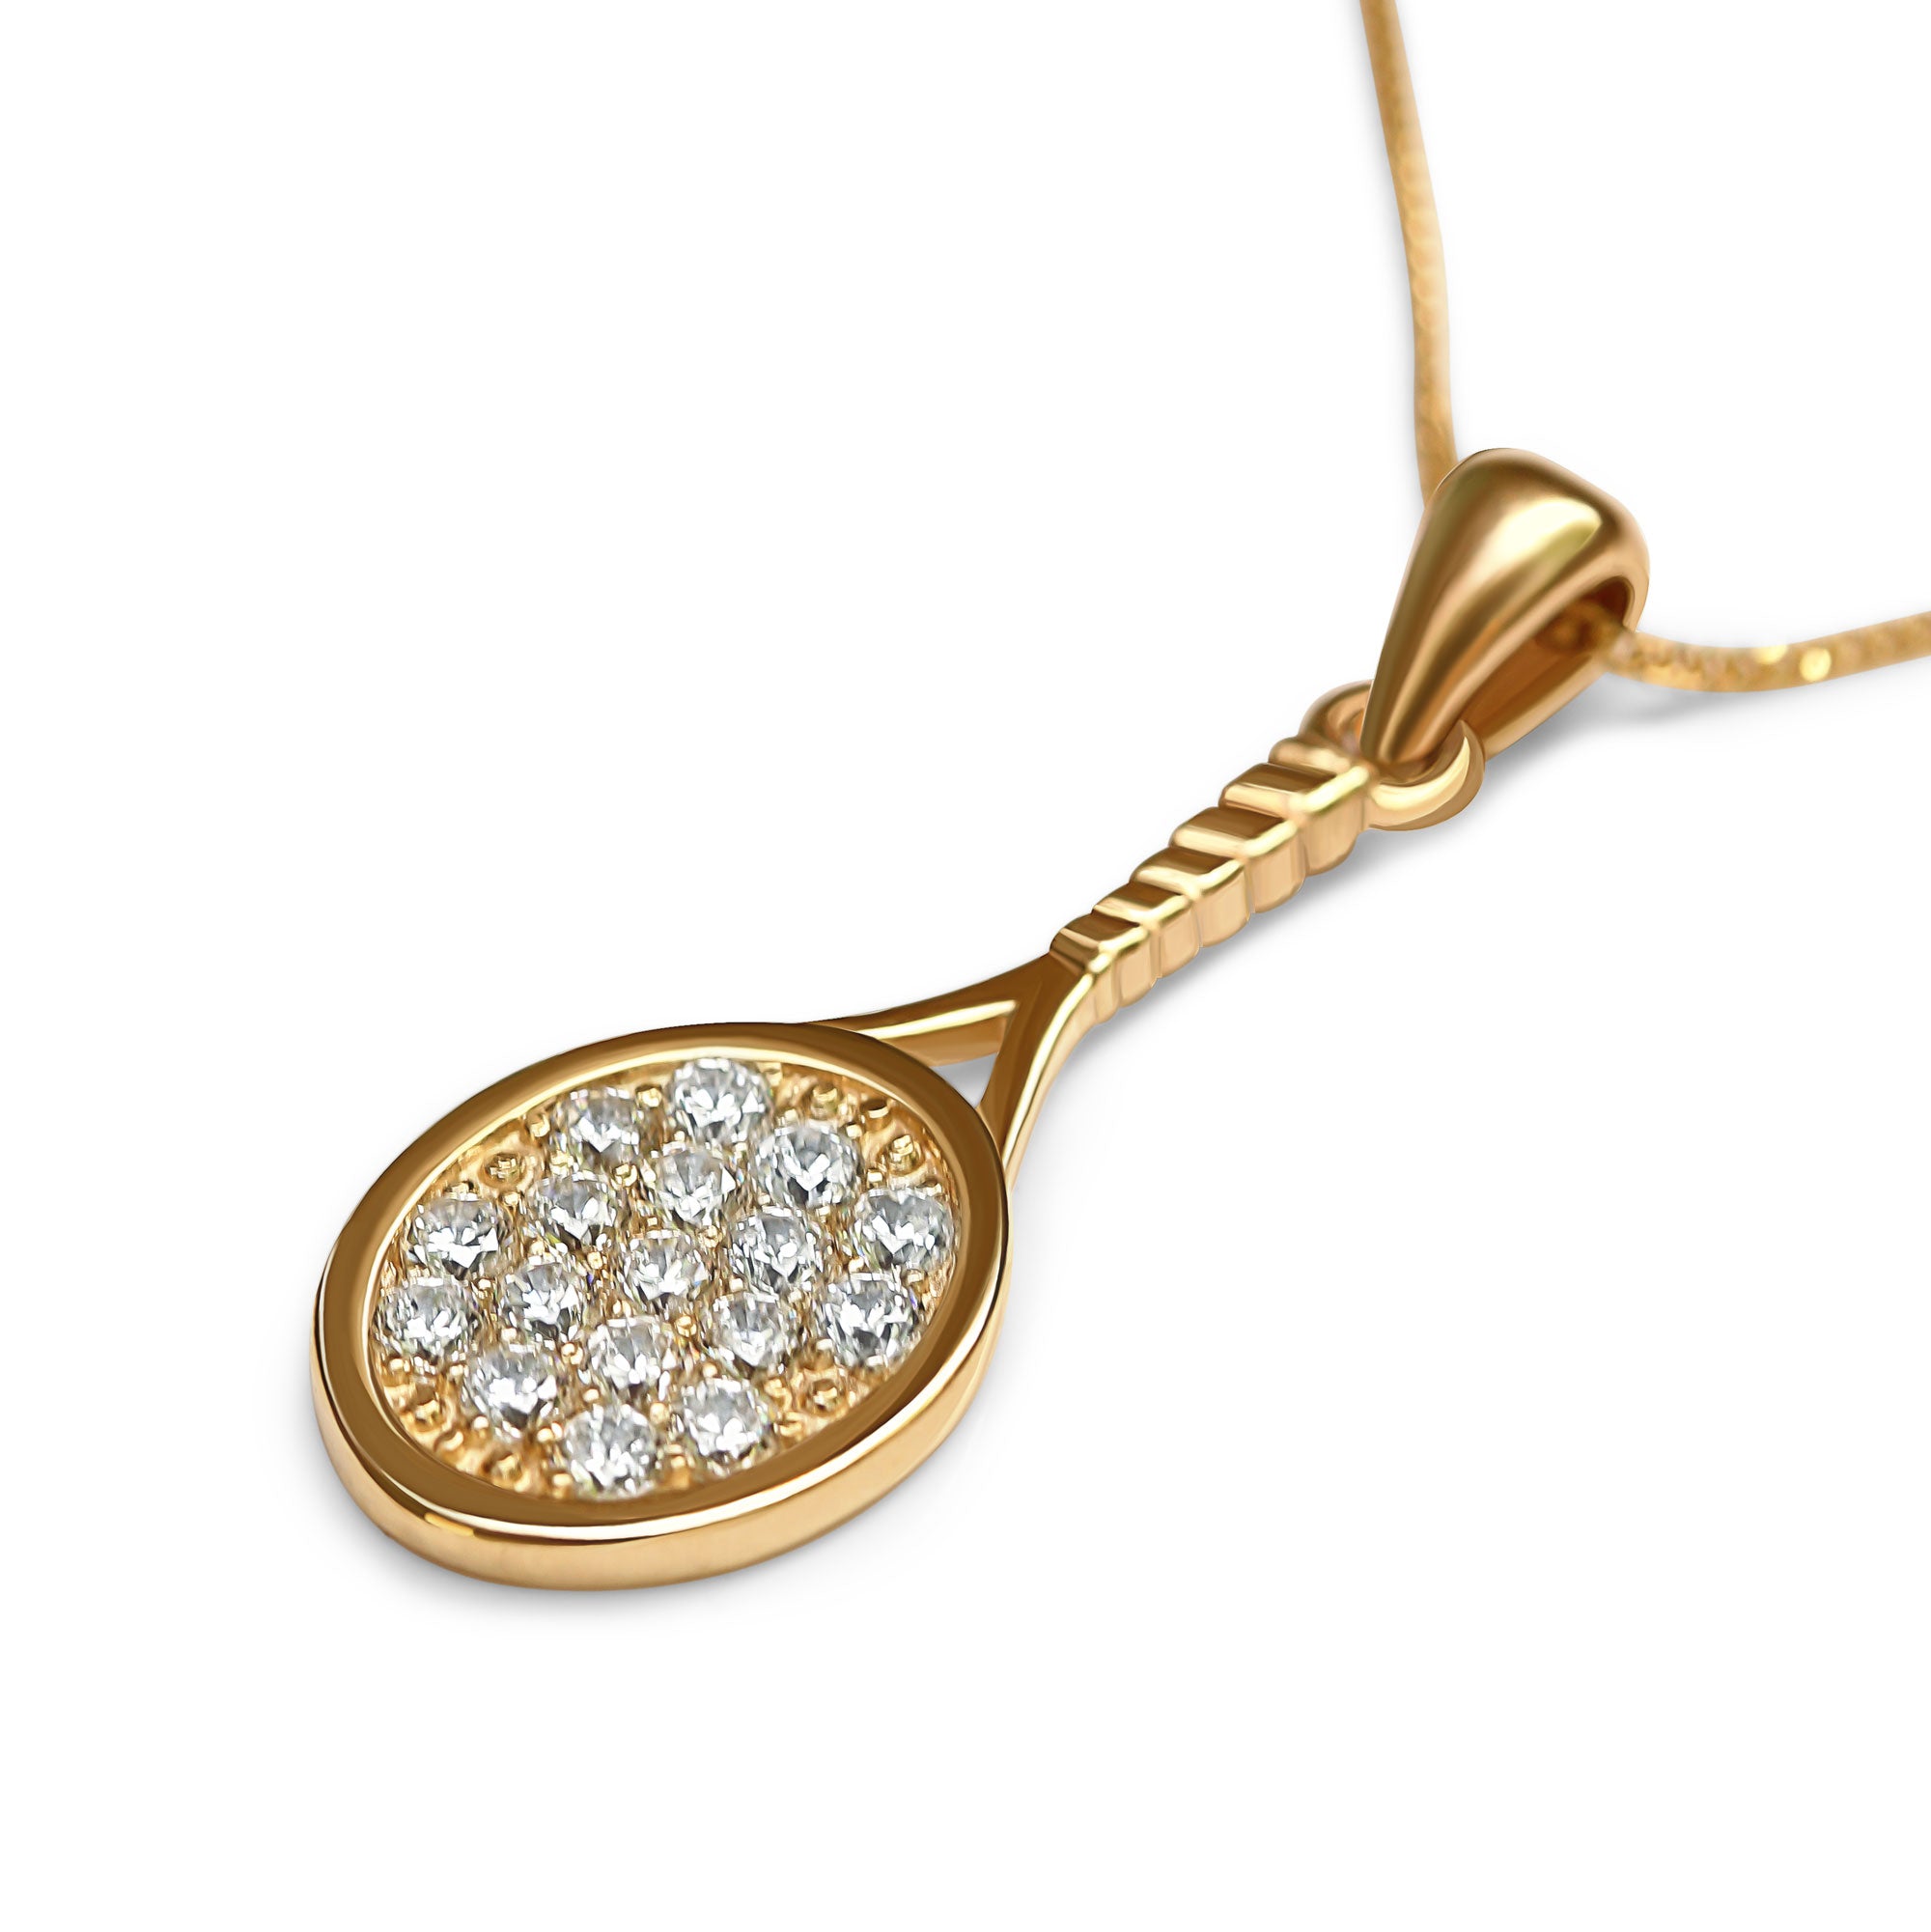 10K Yellow Gold tennis racket necklace